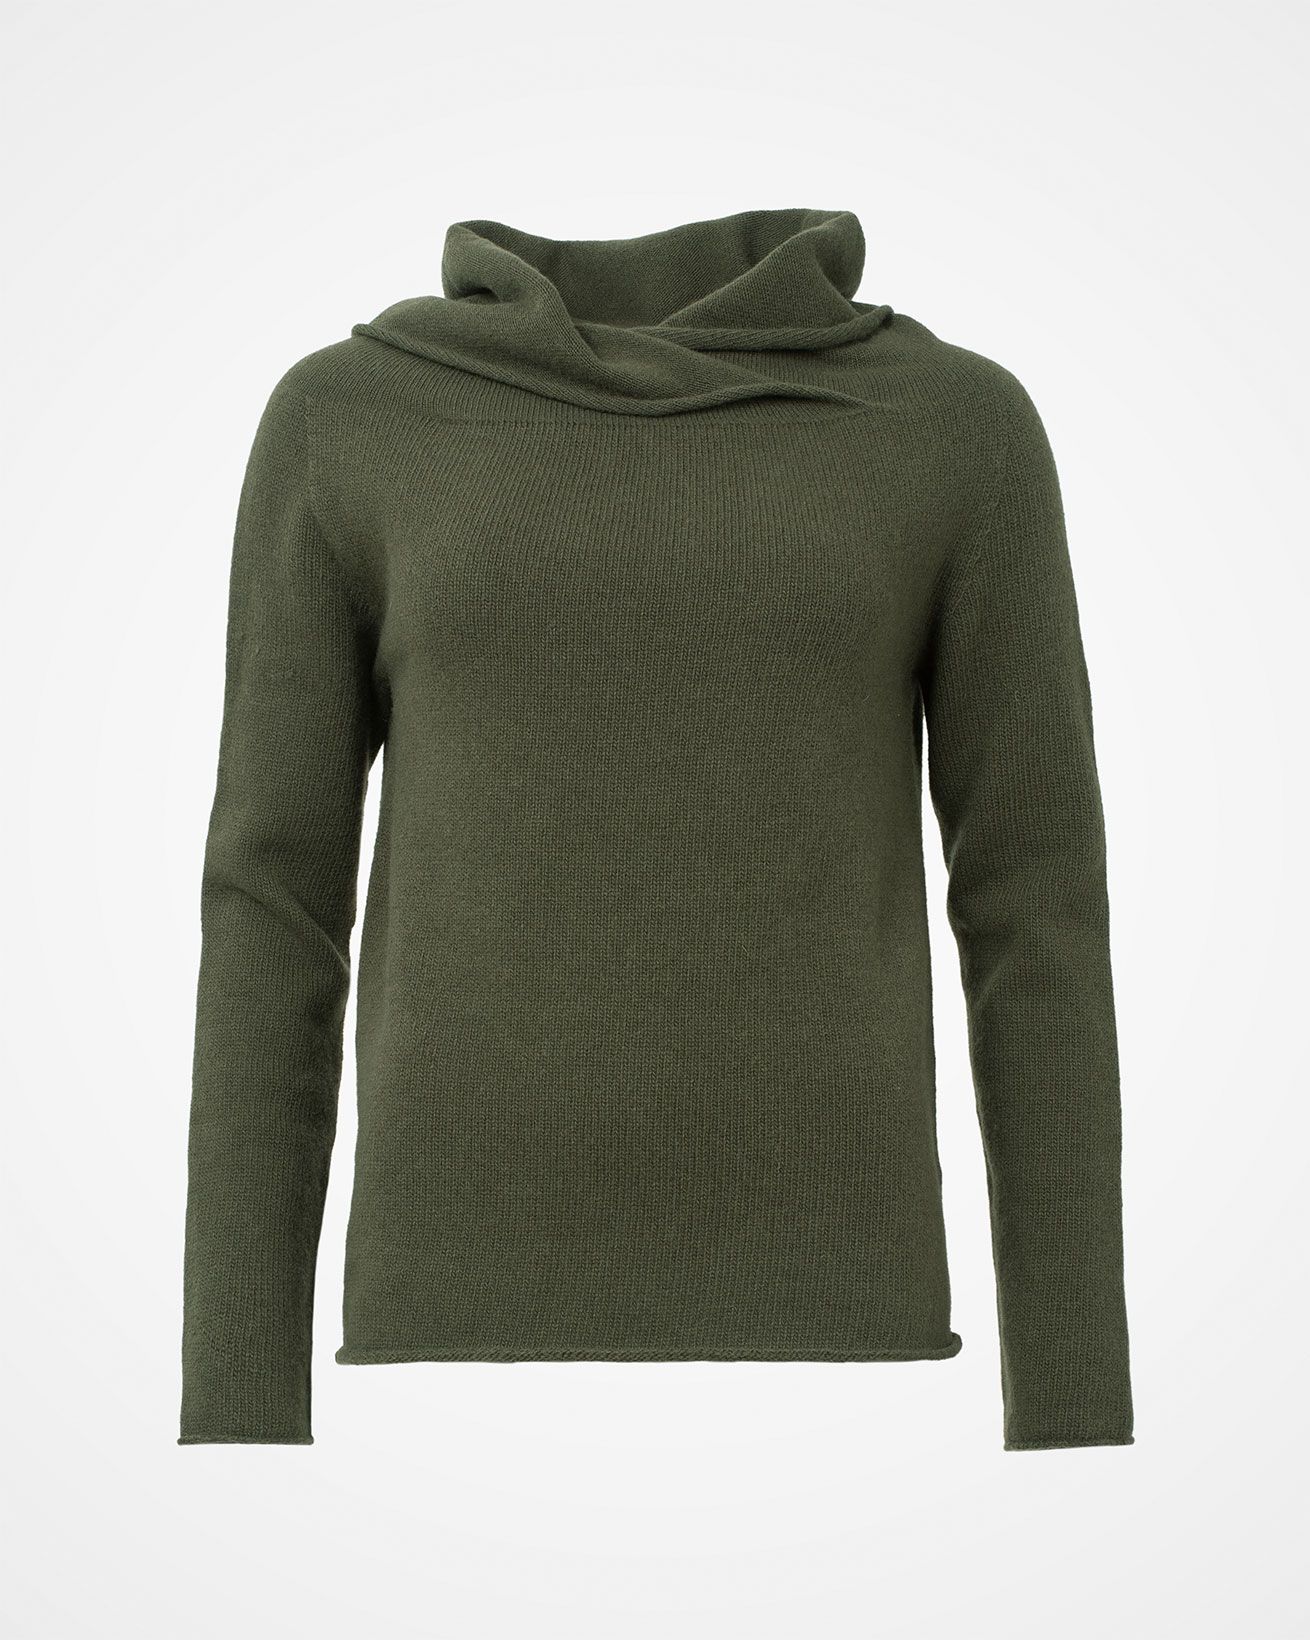 6284_collared-slouch-jumper_olive_front.jpg